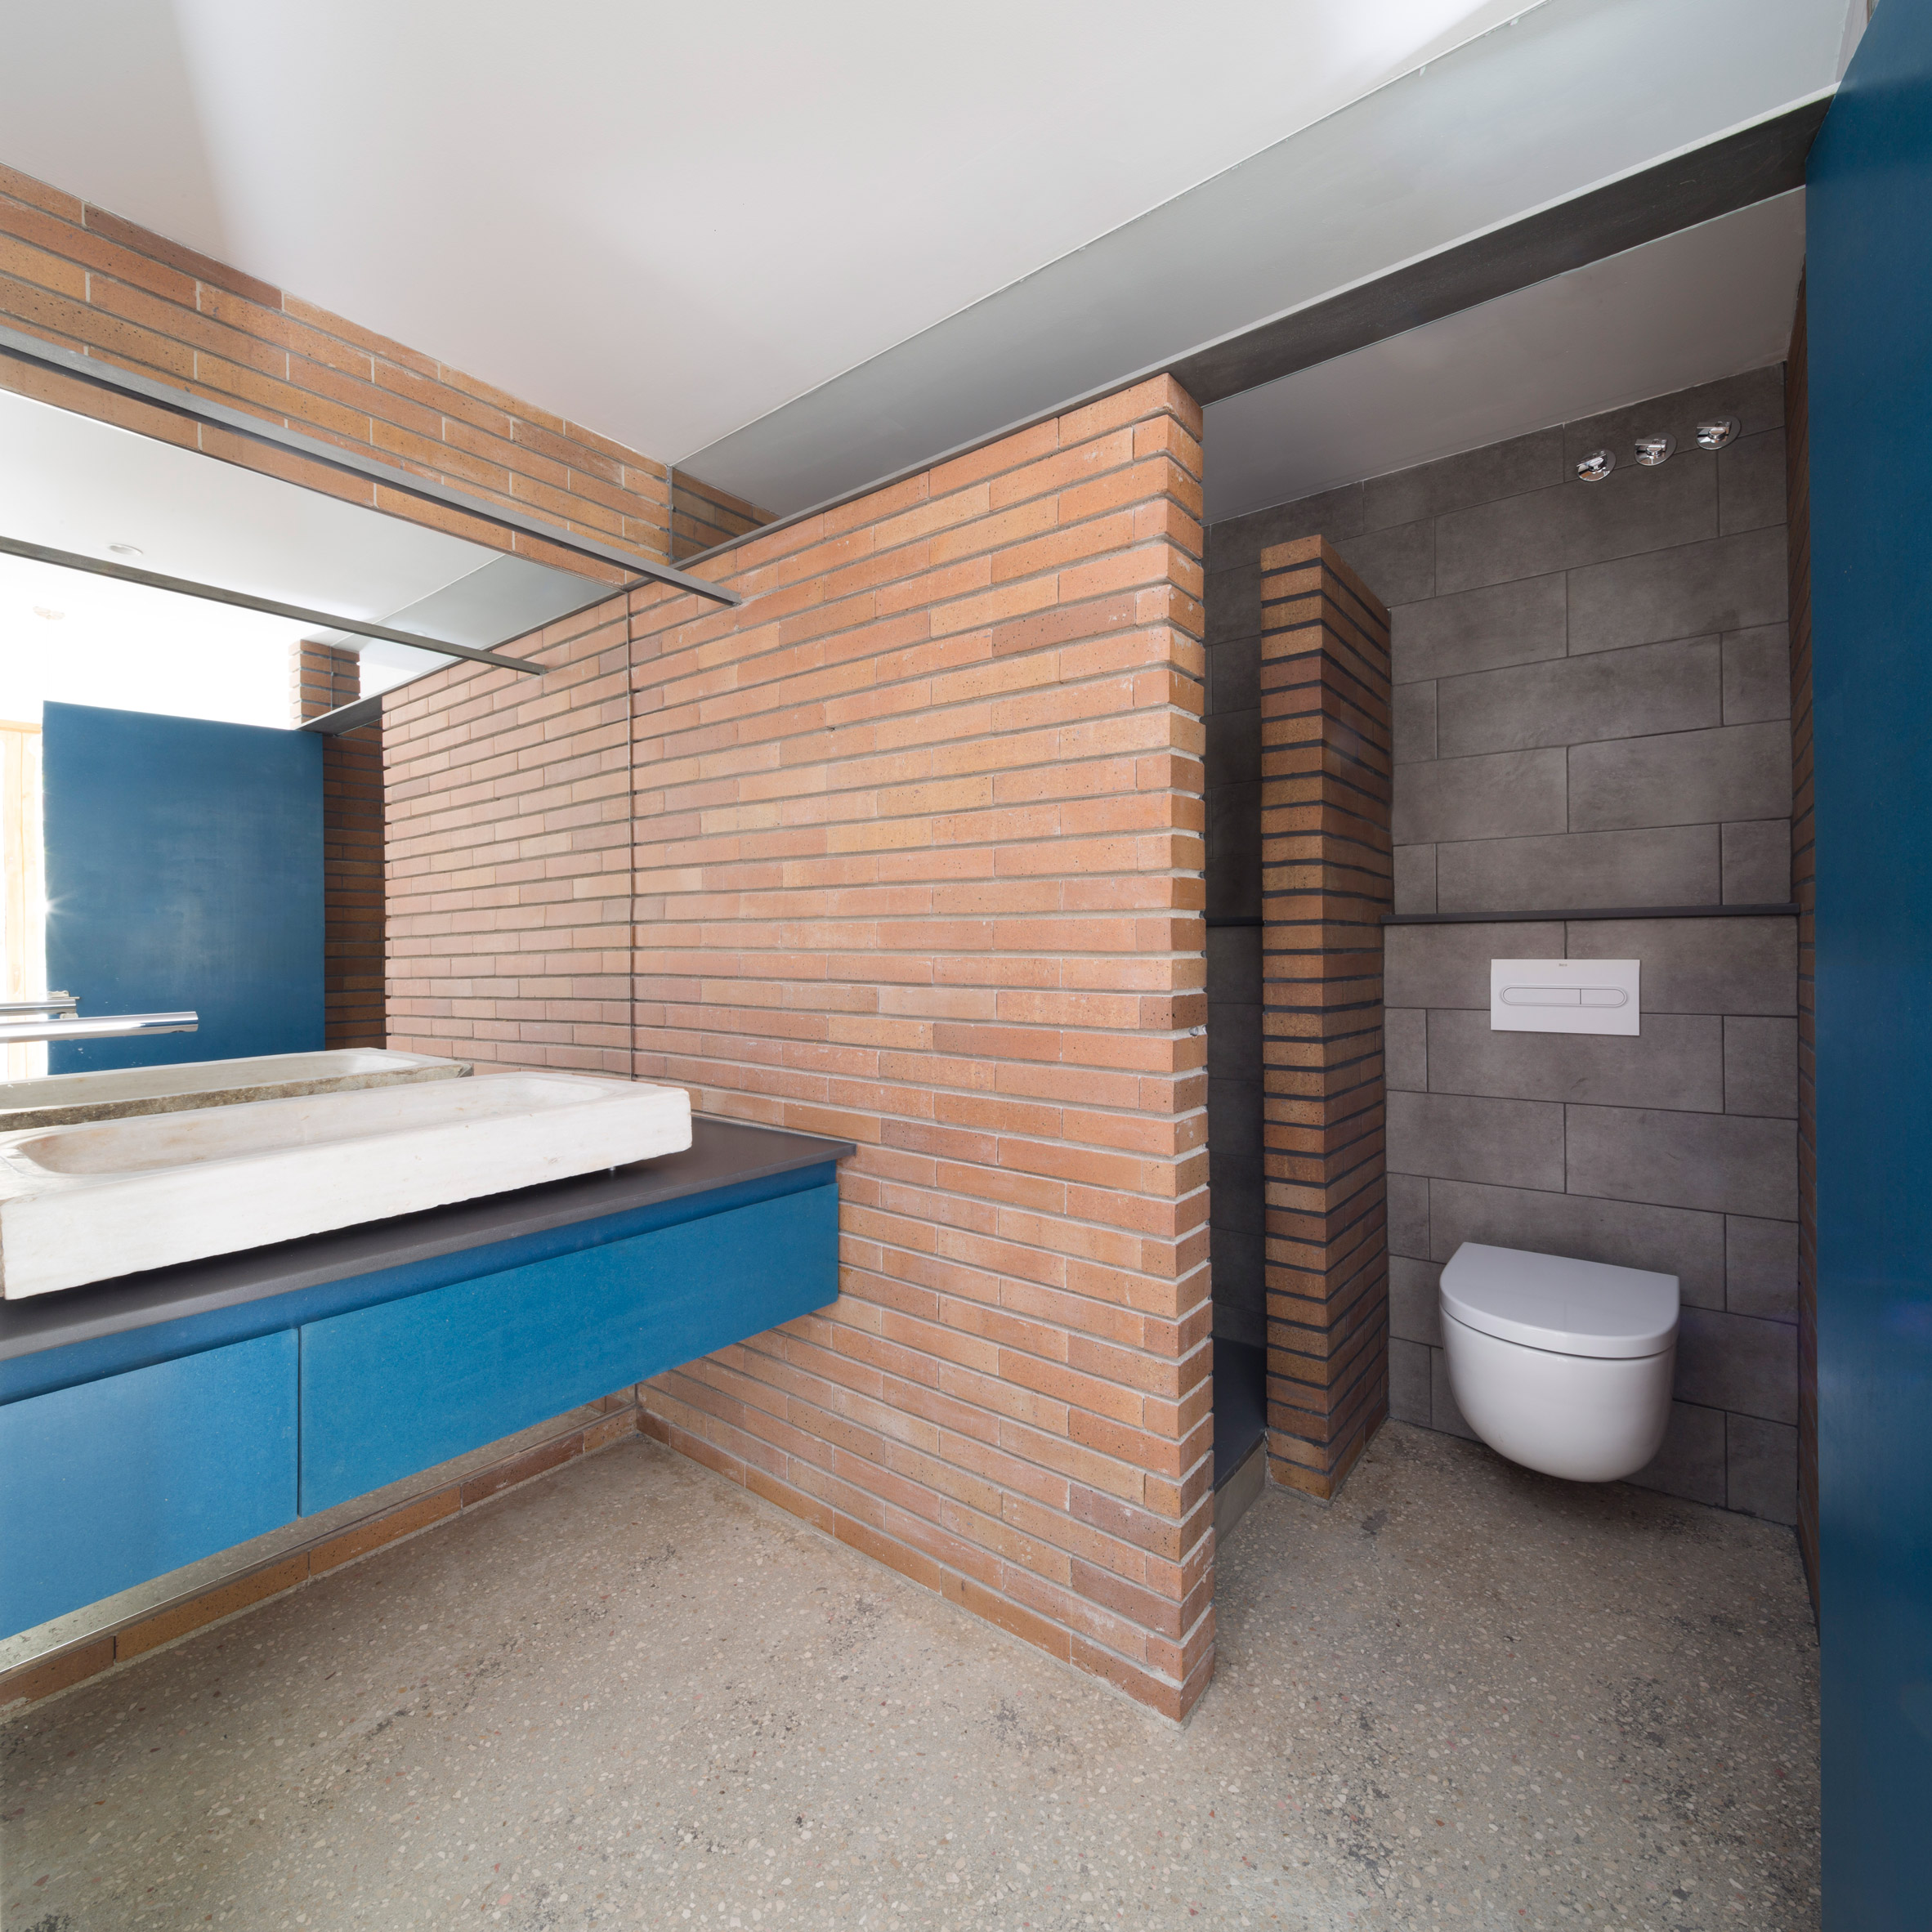 bed-and-blue-nook-architects-interiors-residential-barcelona-spain-spanish-houses-phase-one_dezeen_2364_col_13extra